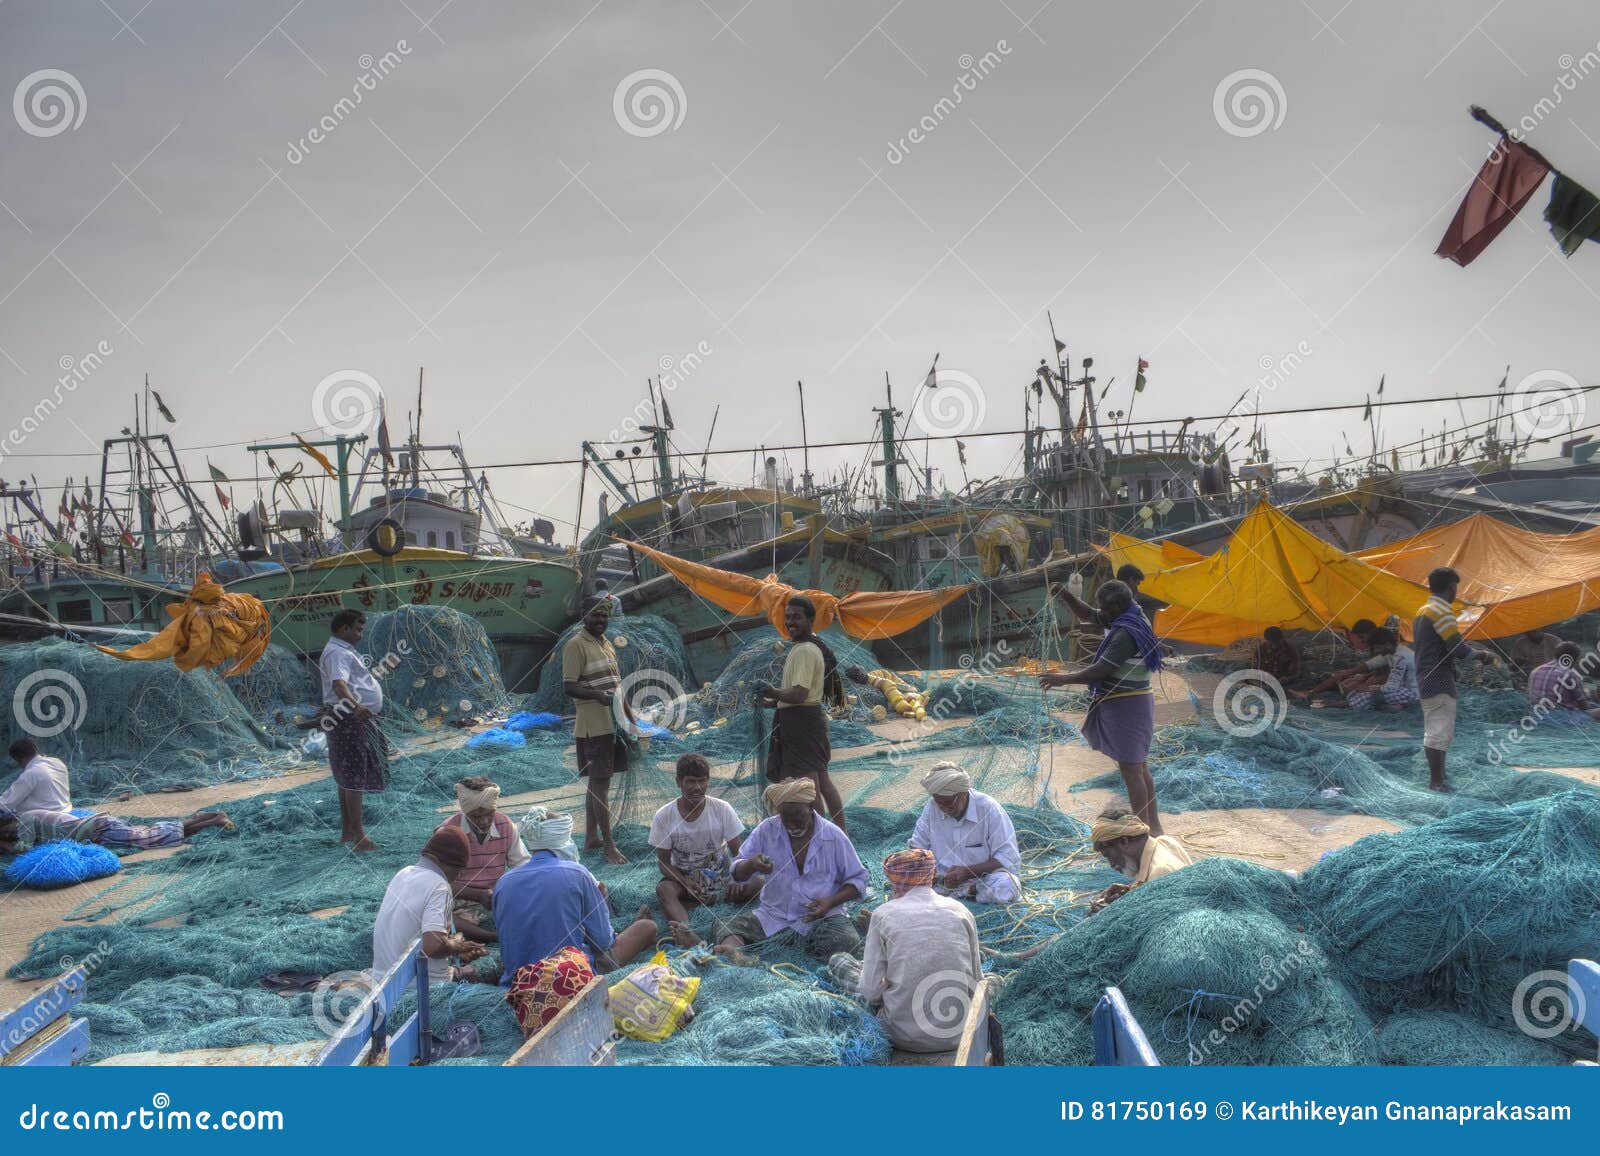 People making fishing net editorial stock image. Image of auction - 81750169